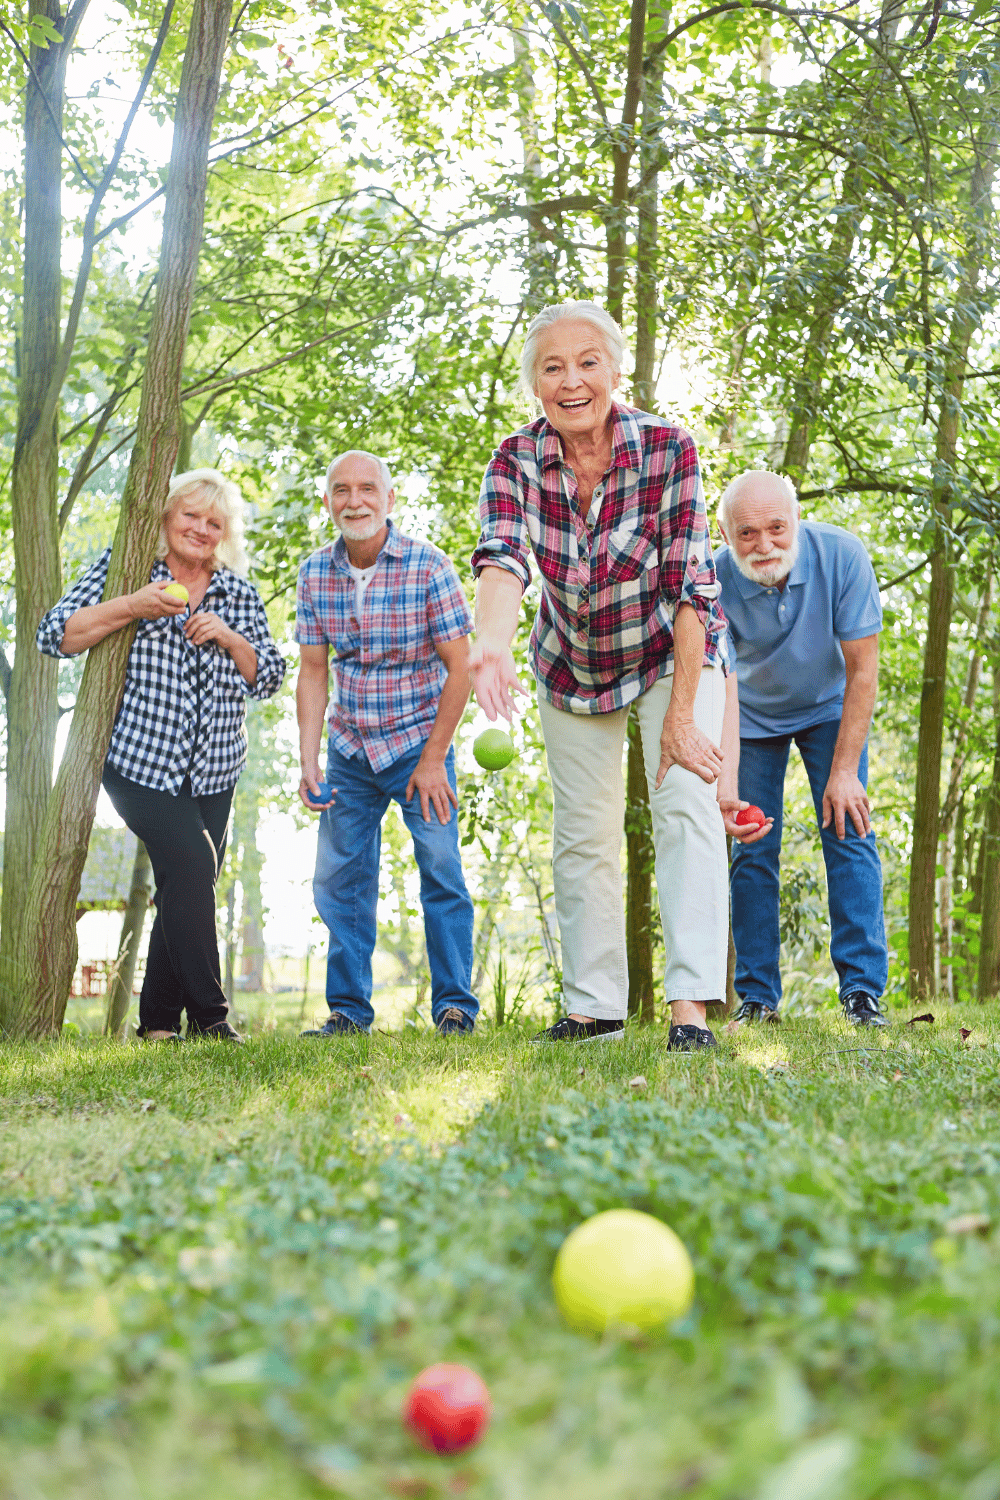 5 Things to Do Now to Maintain Health in Older Age